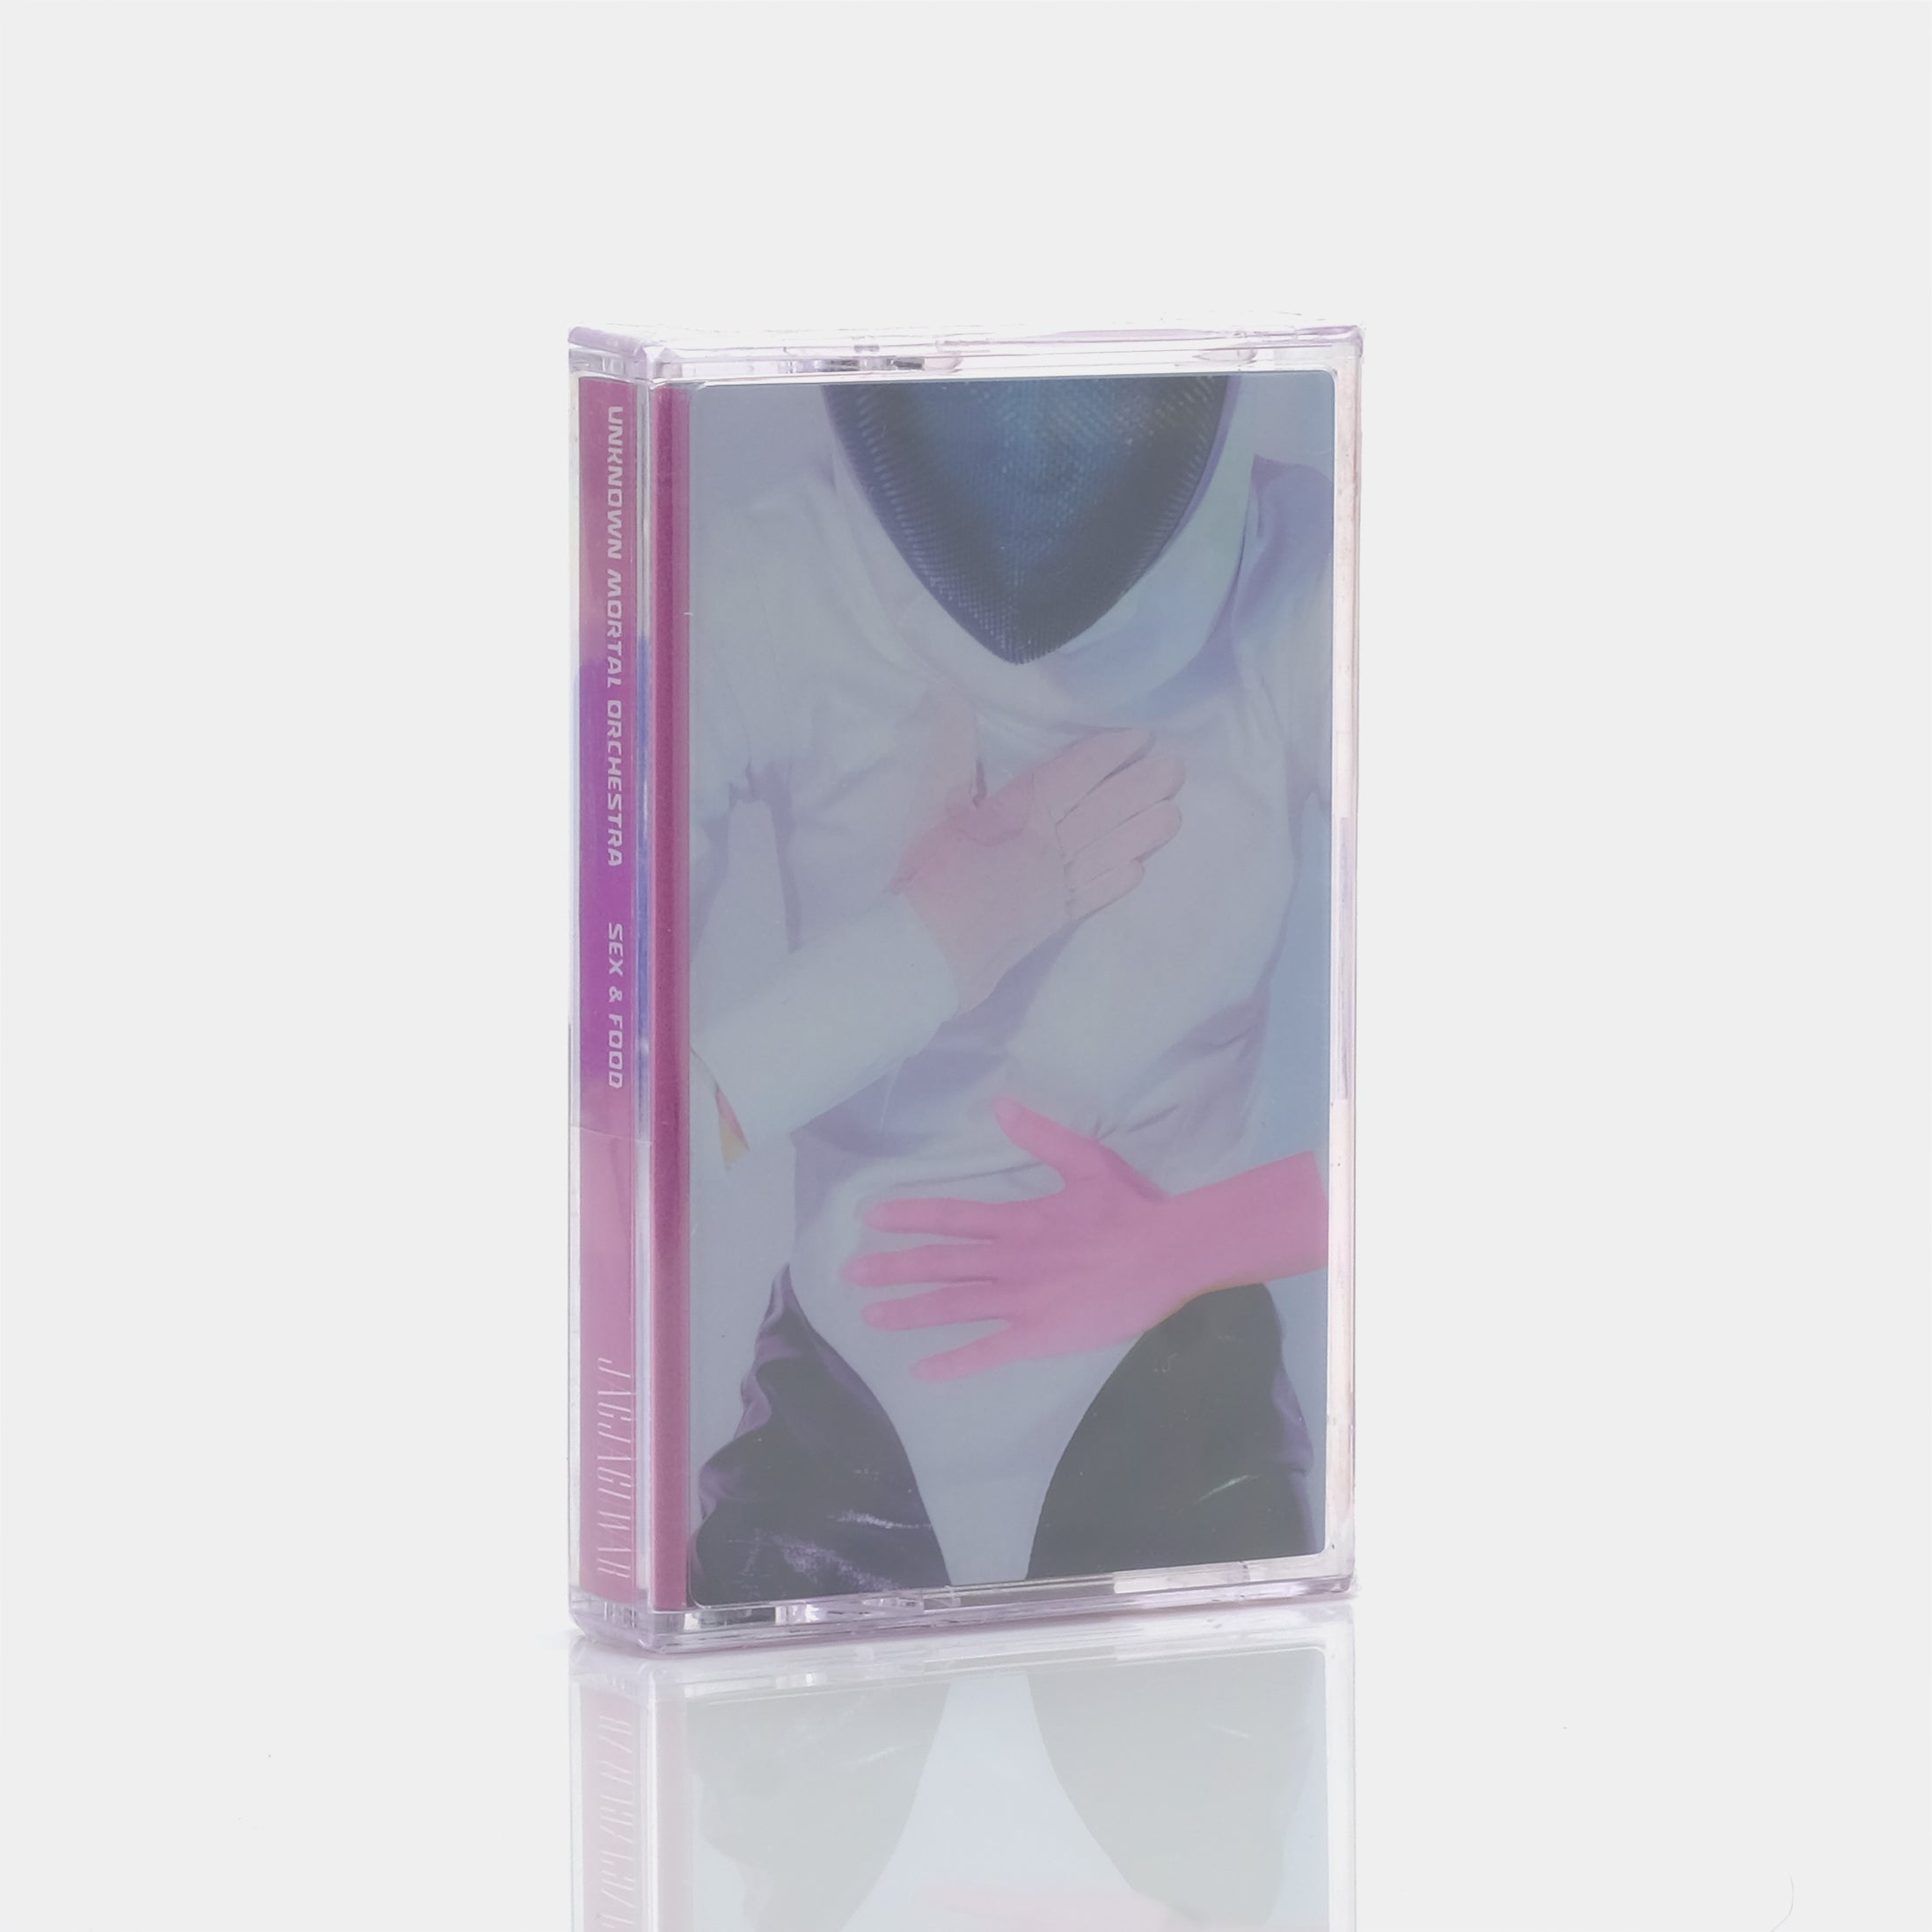 Unknown Mortal Orchestra - Sex & Food Cassette Tape